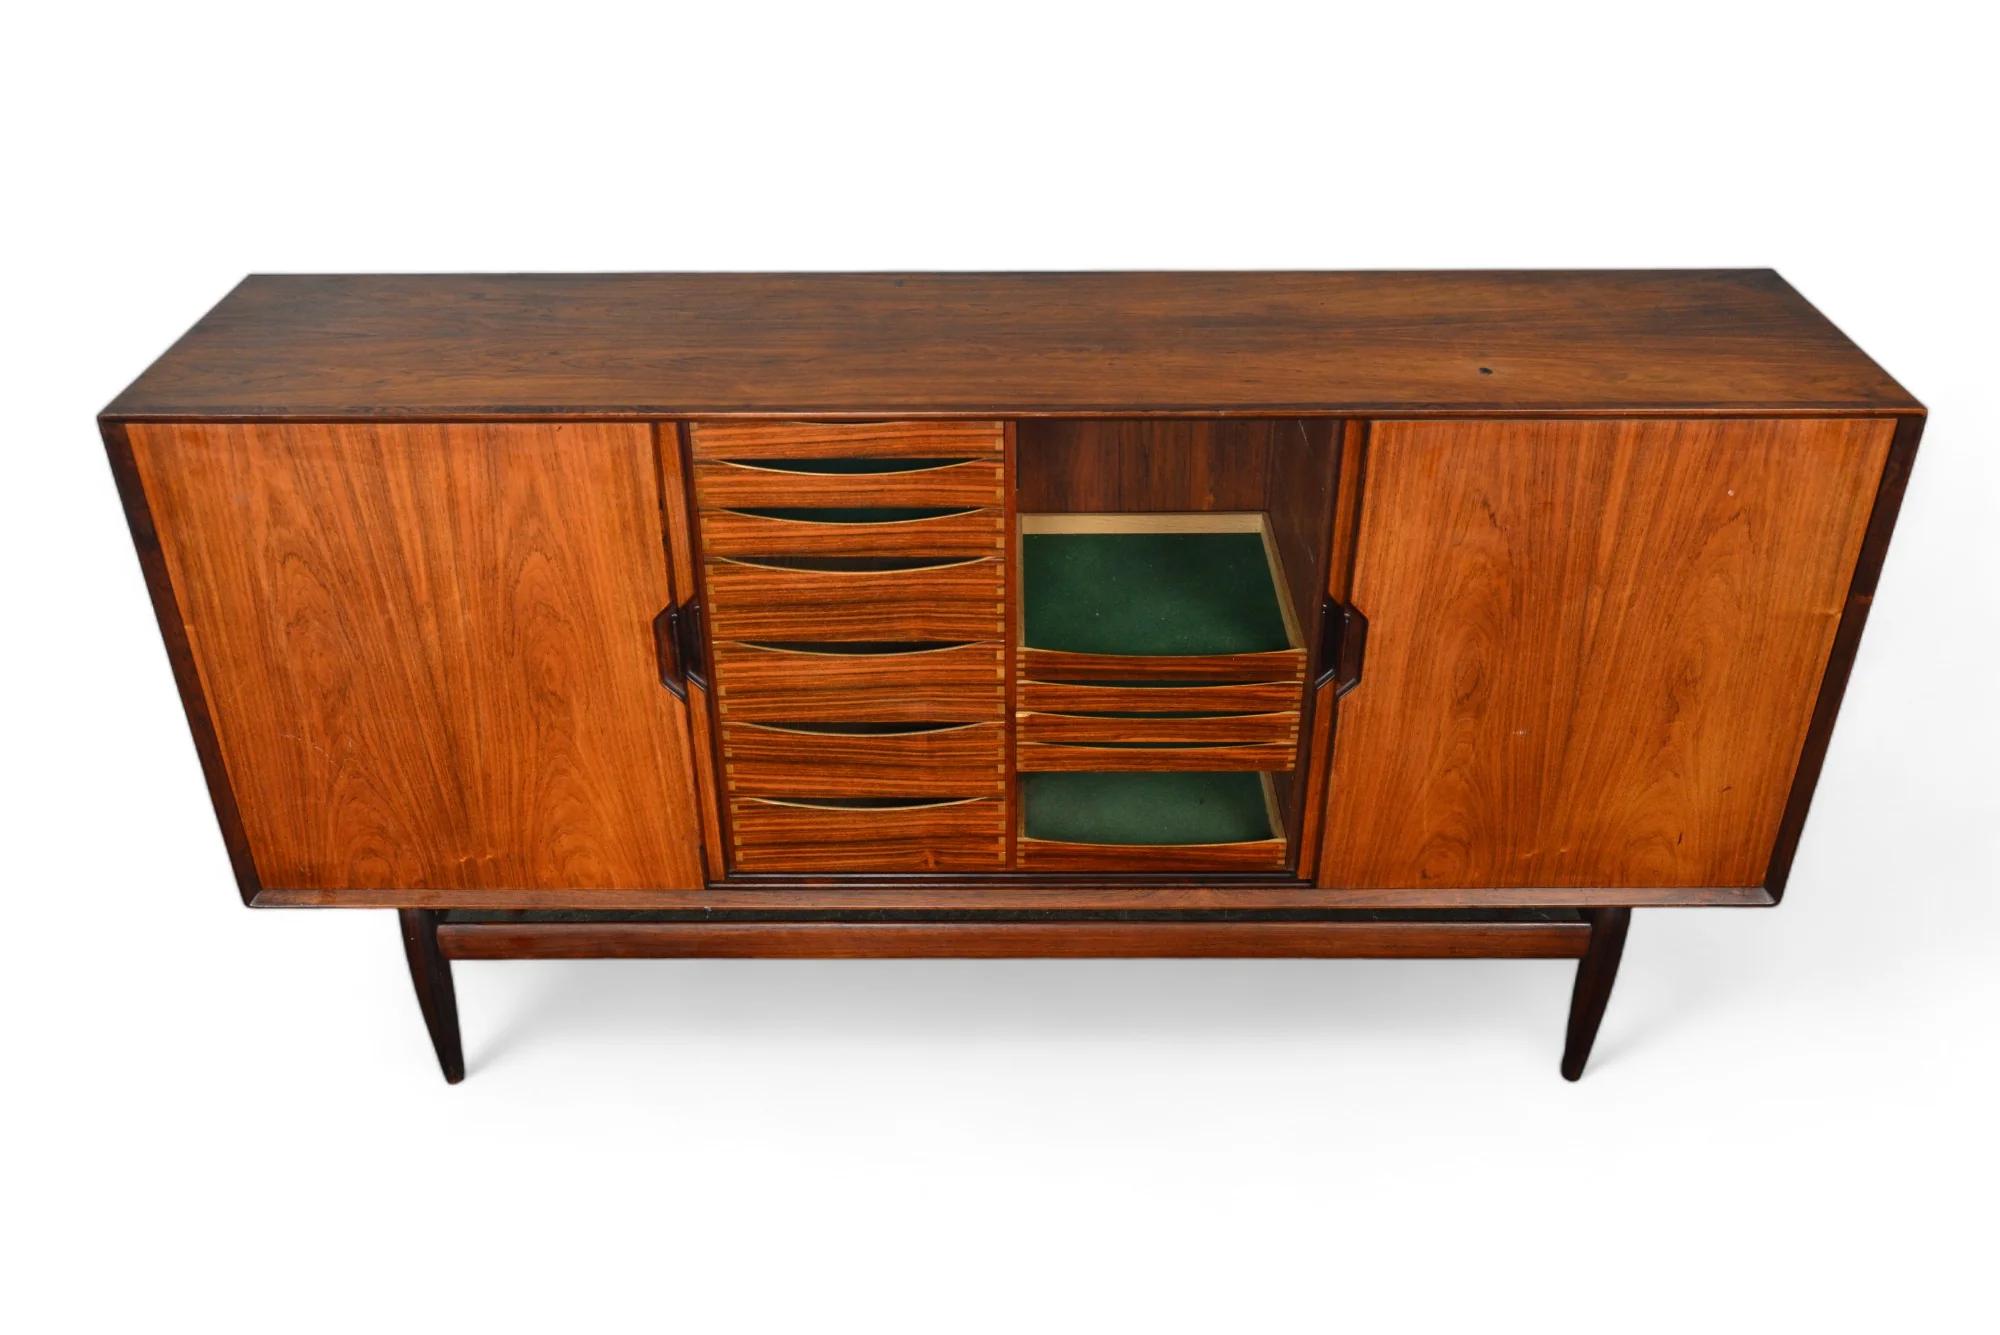 Tall Rosewood Credenza By Henry Rosengren Hansen In Good Condition For Sale In Berkeley, CA